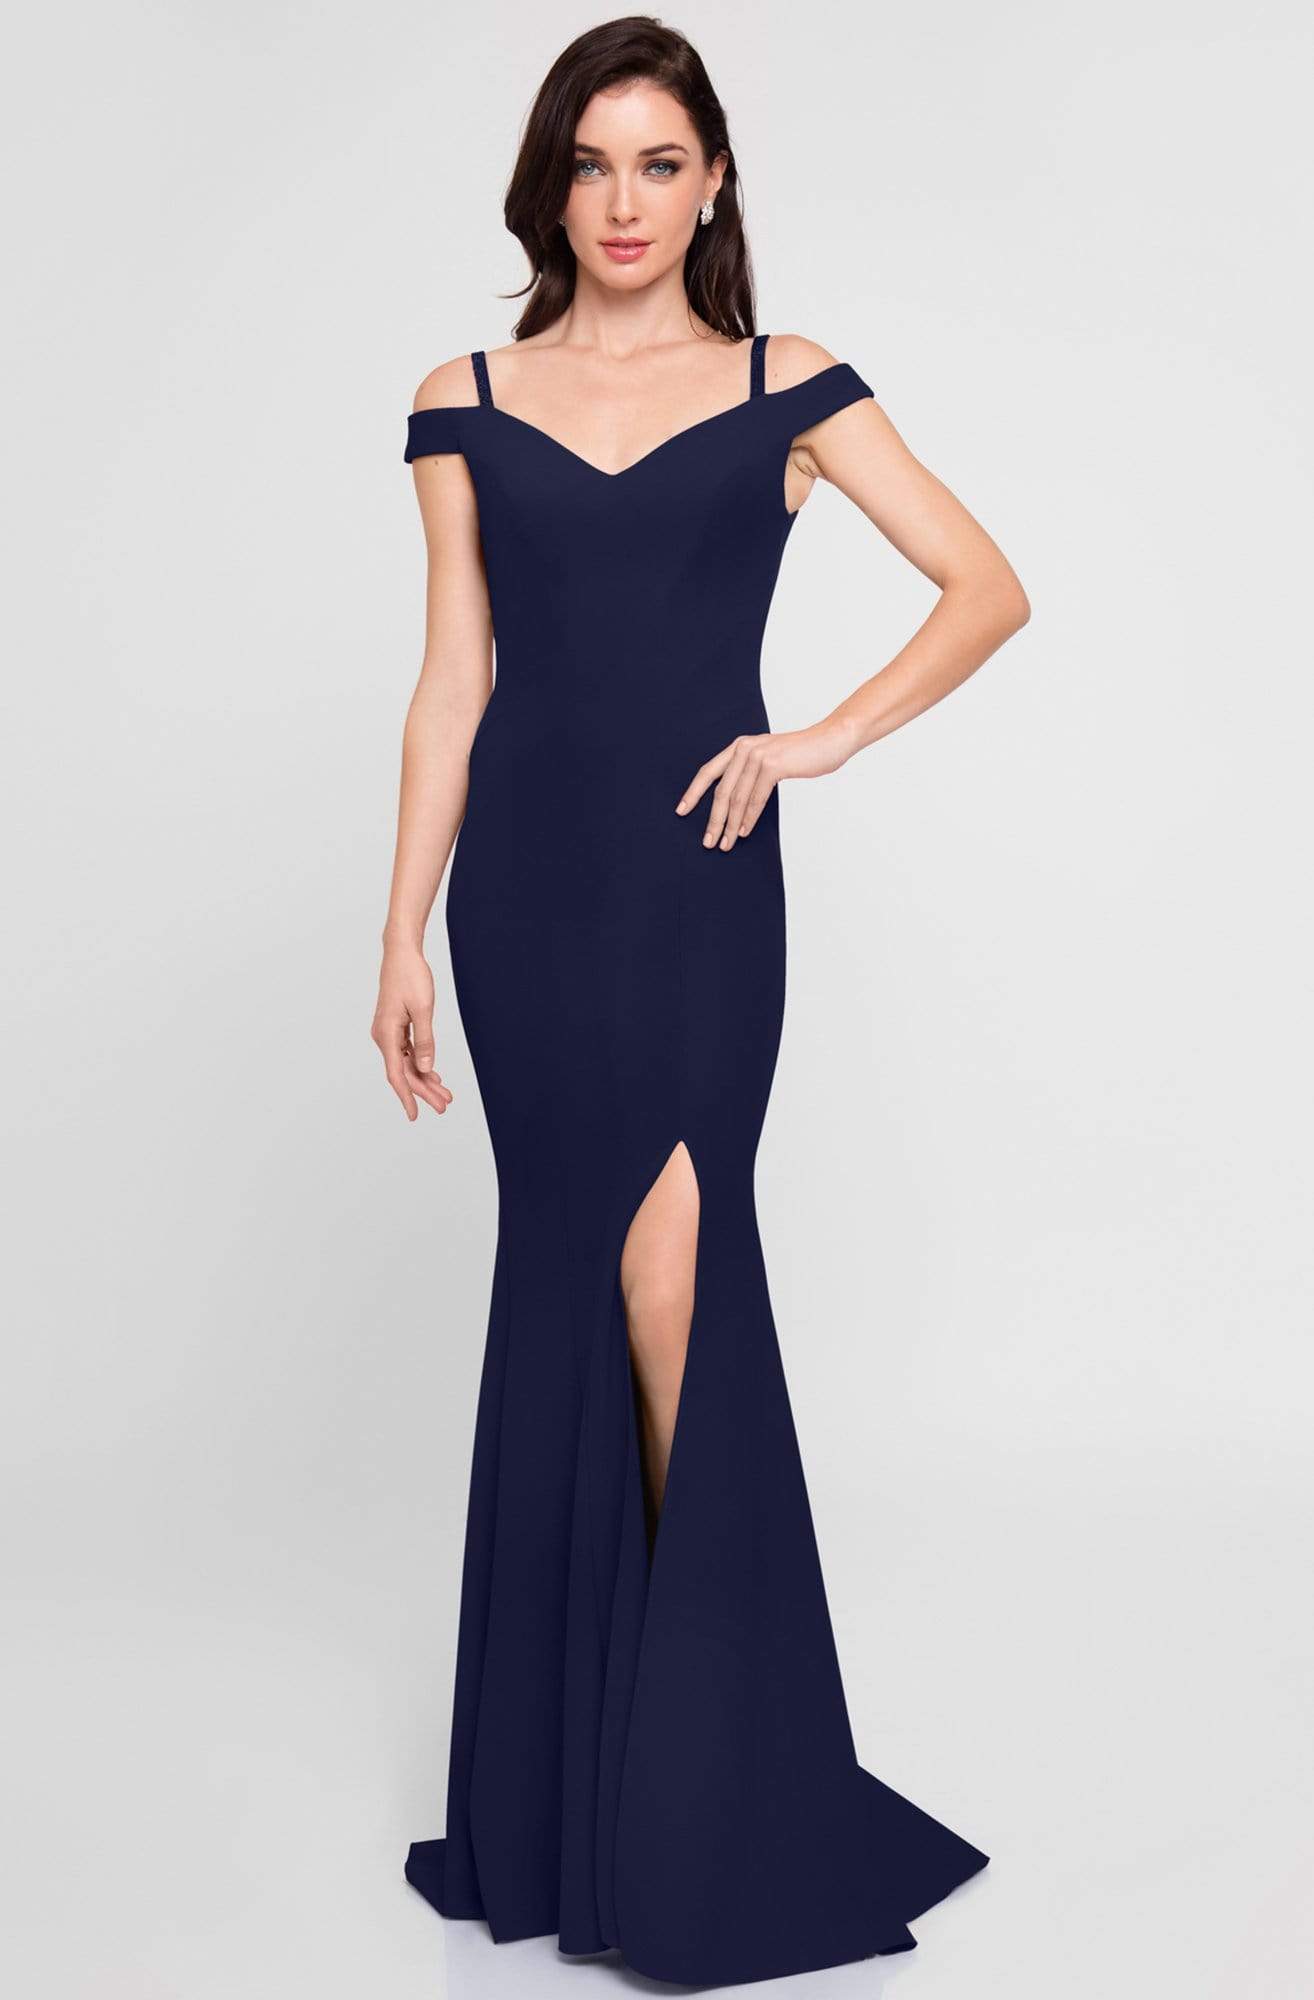 Terani Couture - 1813B5185 Sculpted Off Shoulder High Slit Sheath Gown Special Occasion Dress 00 / Navy